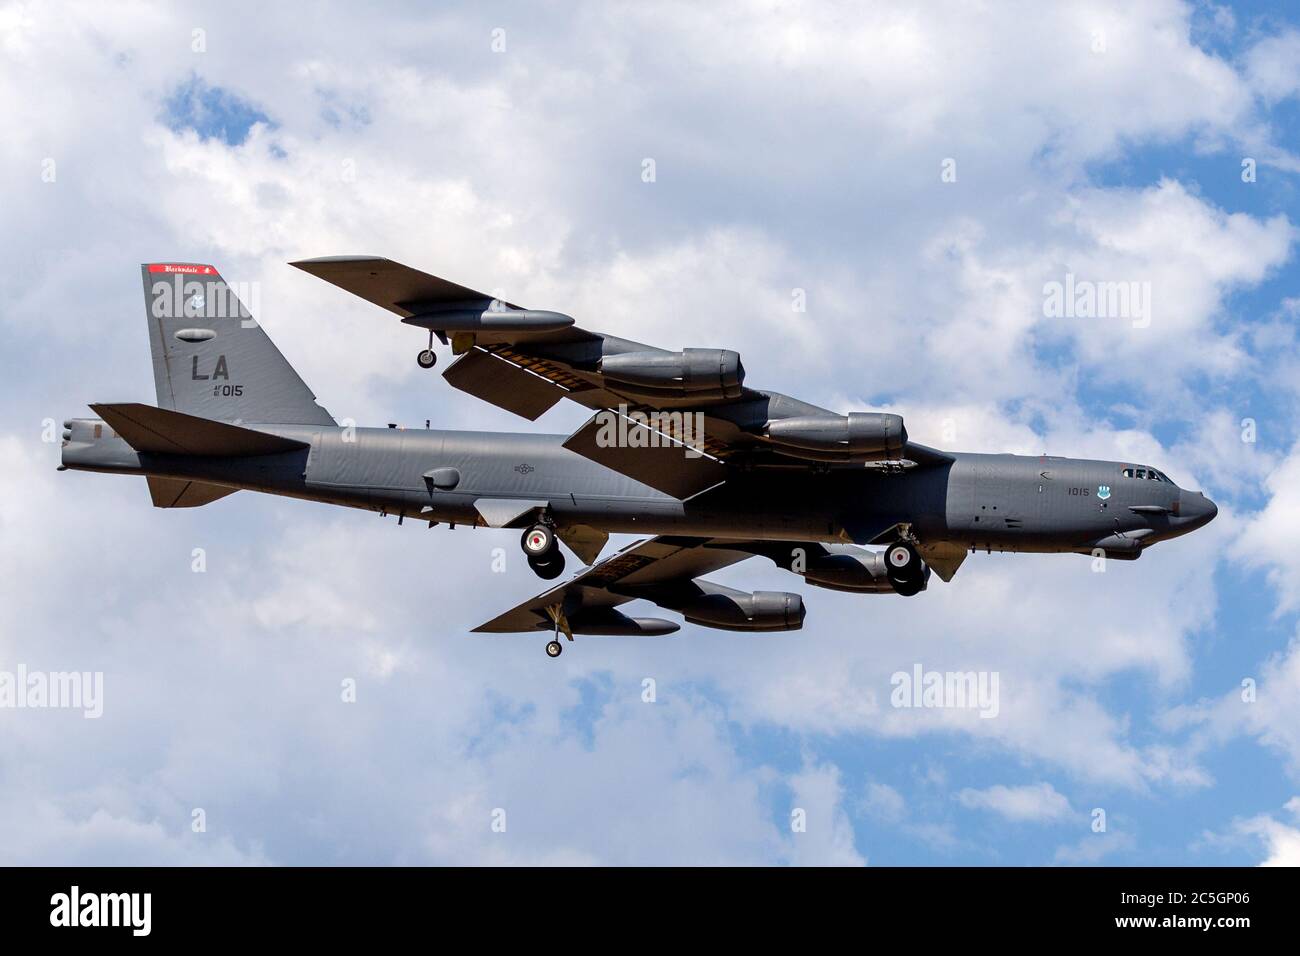 United States Air Force (USAF) Boeing B-52H Stratofortress strategic bomber aircraft (61-0015) from Barksdale Air Force Base on approach to land at Av Stock Photo